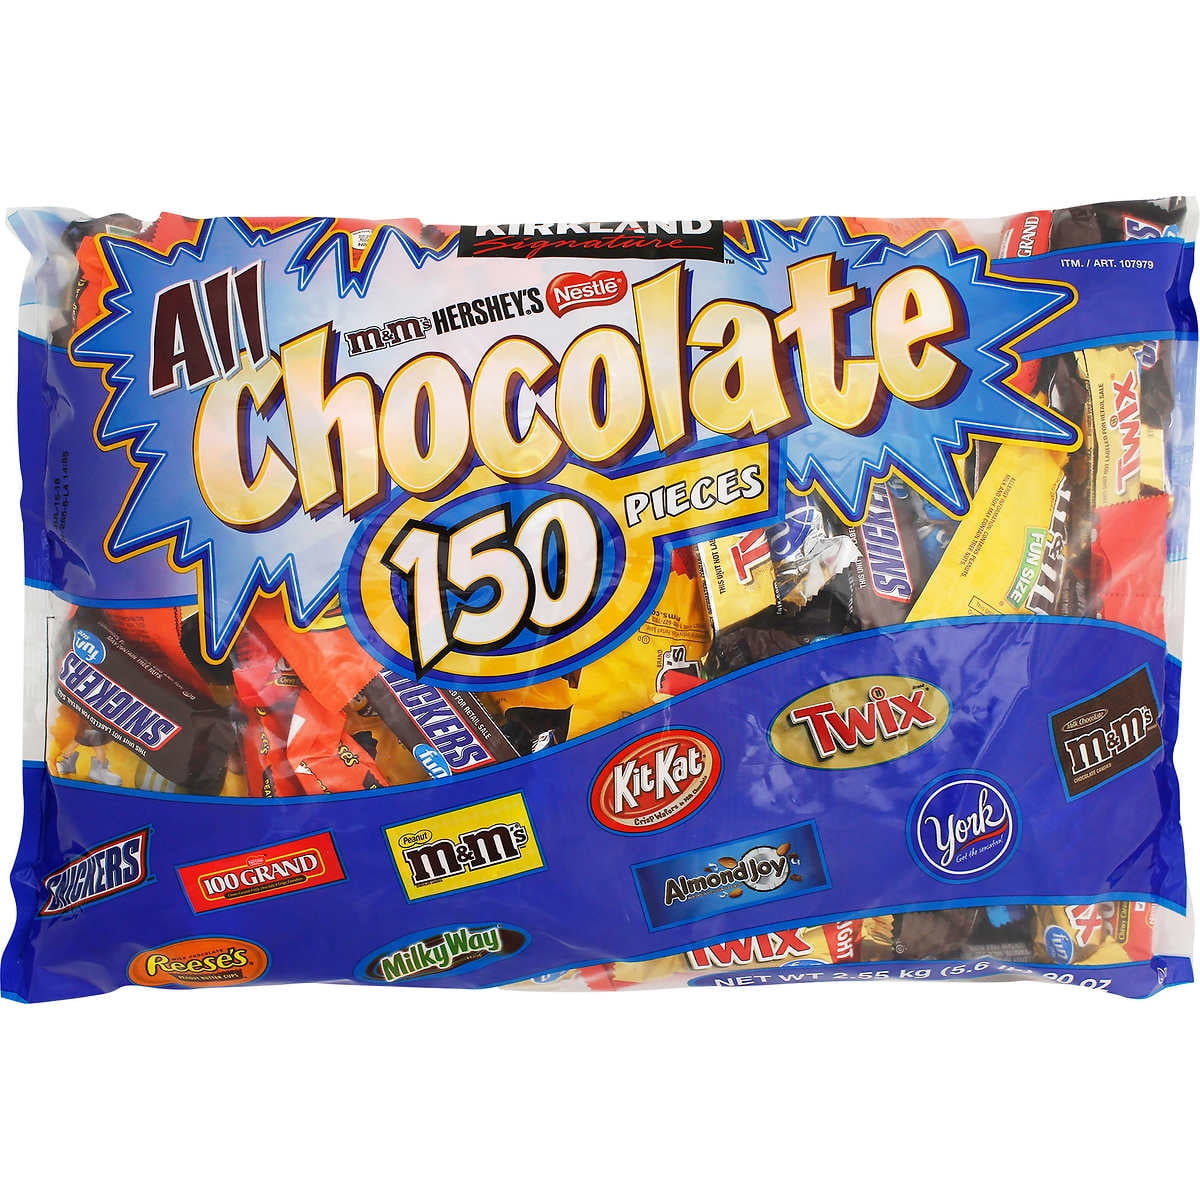 Assorted Chocolates, 18.4 oz. Bag | Russell Stover